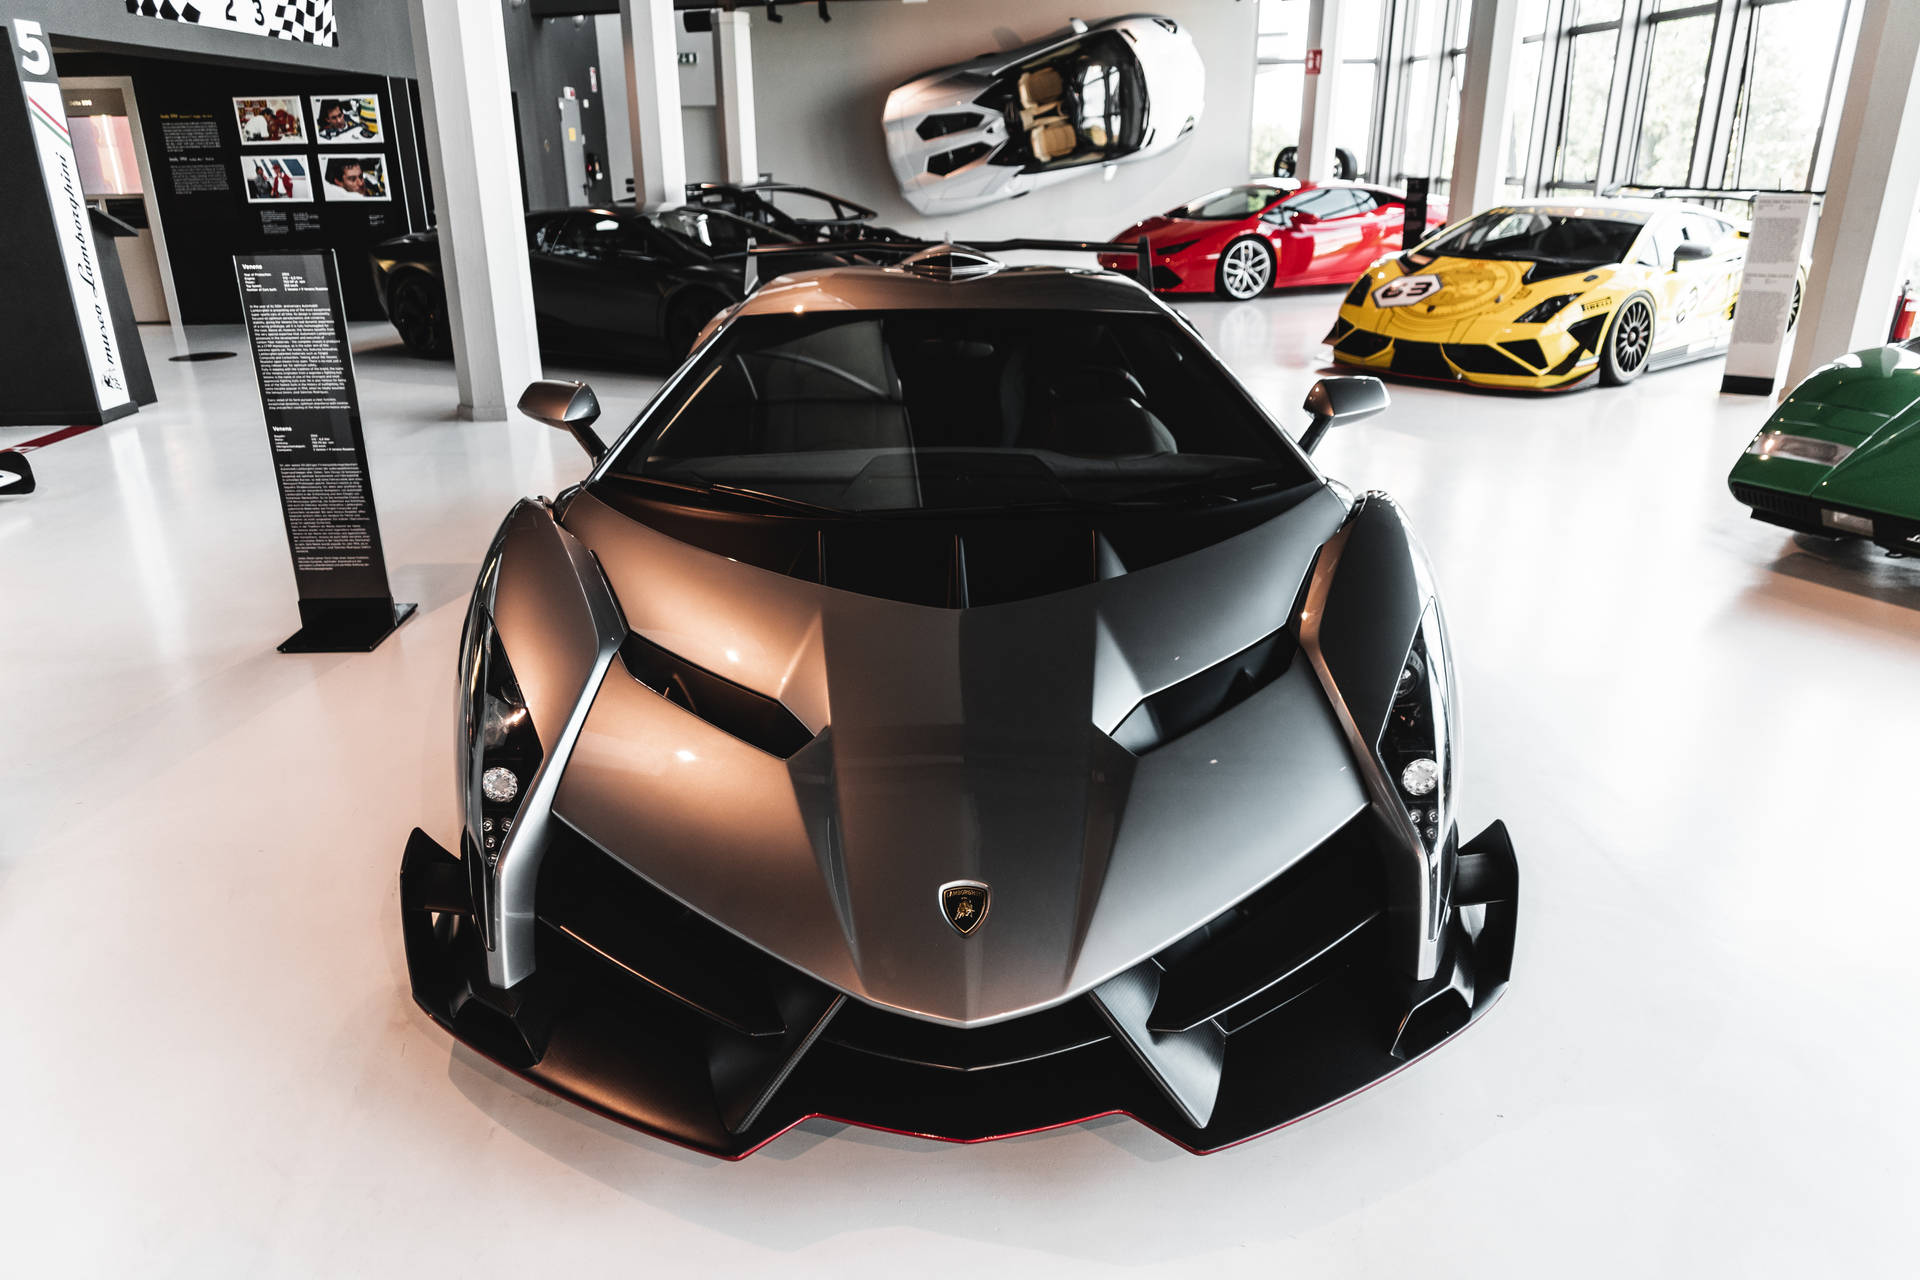 "Stunning Display of the Luxurious Veneno V12 at the Car Museum" Wallpaper